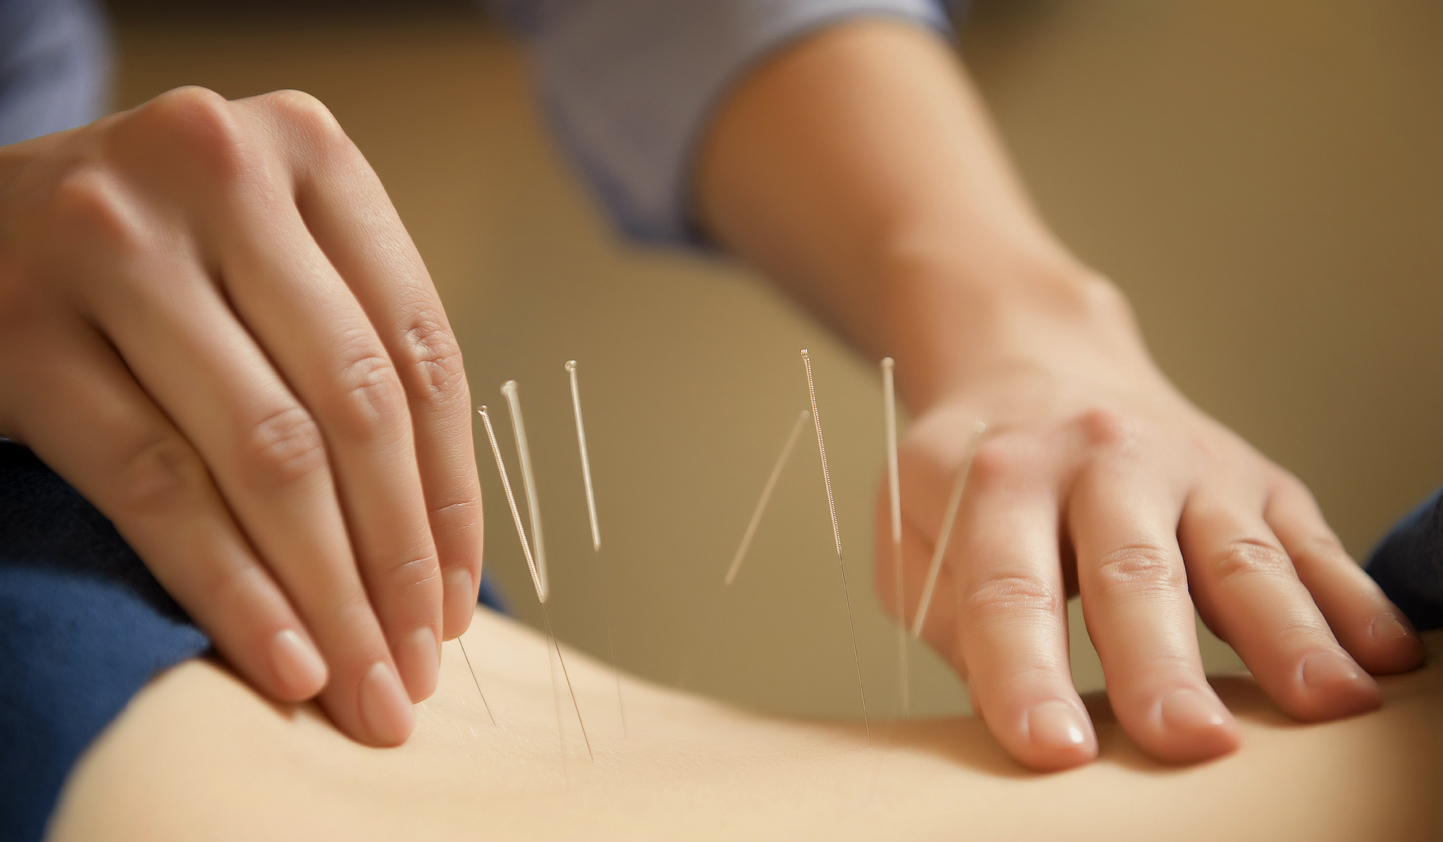 acupuncture within a multi-disciplinary approach to treating pain without opioid medications.